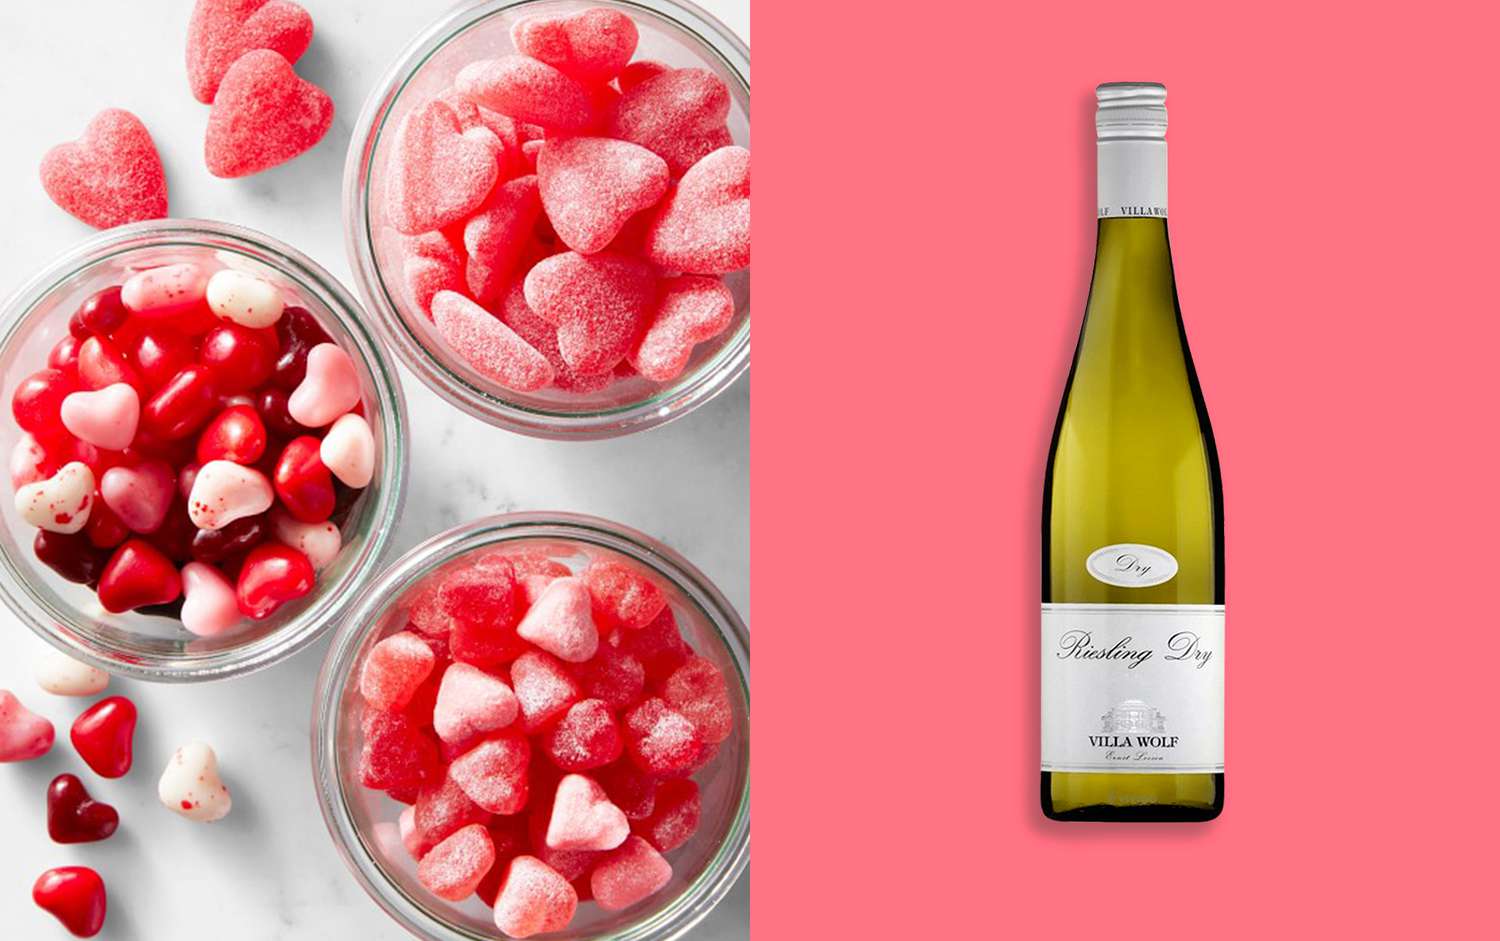 sour gummy heart candies and riesling wine for valentine's day candy and wine pairing